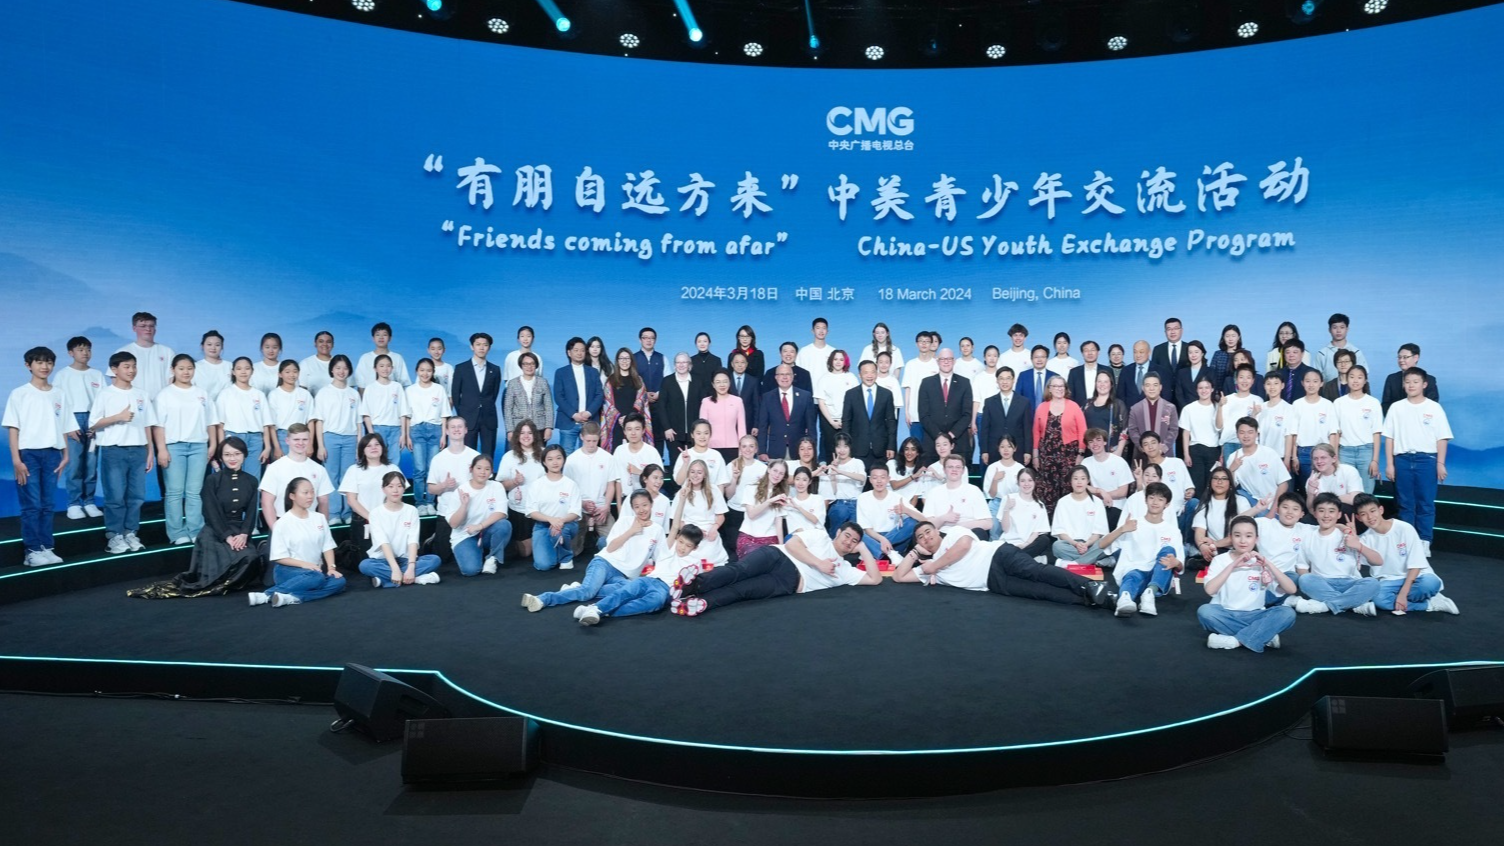 Attendees of the China-U.S. Youth Exchange Program pose for a picture in Beijing, March 18, 2024. /CMG